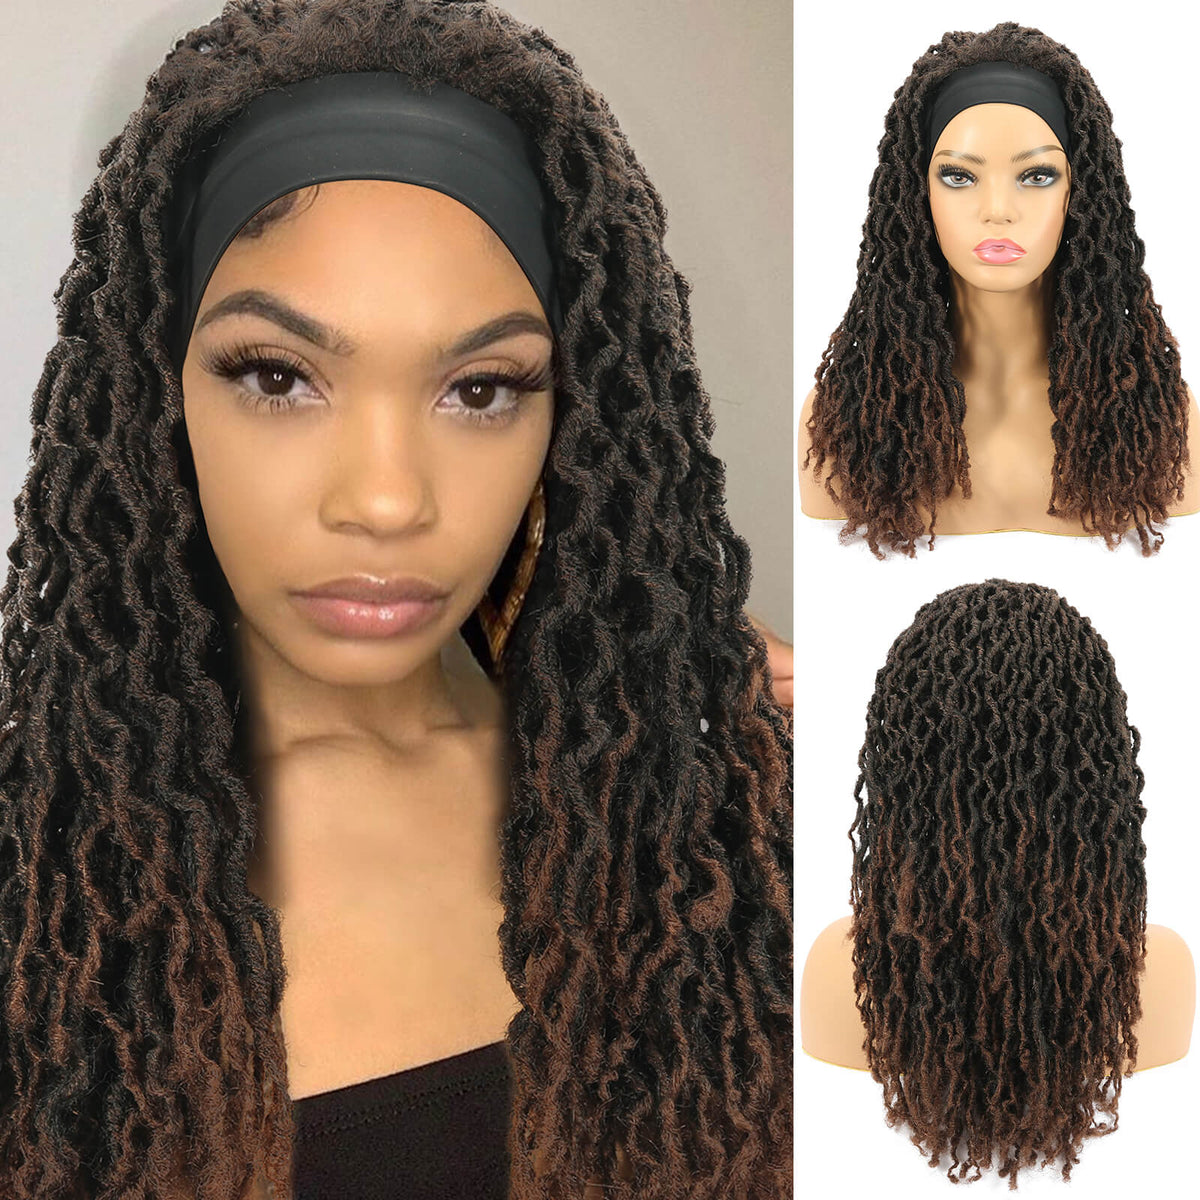 French Curly Braided Wigs – sazzyhaircollection